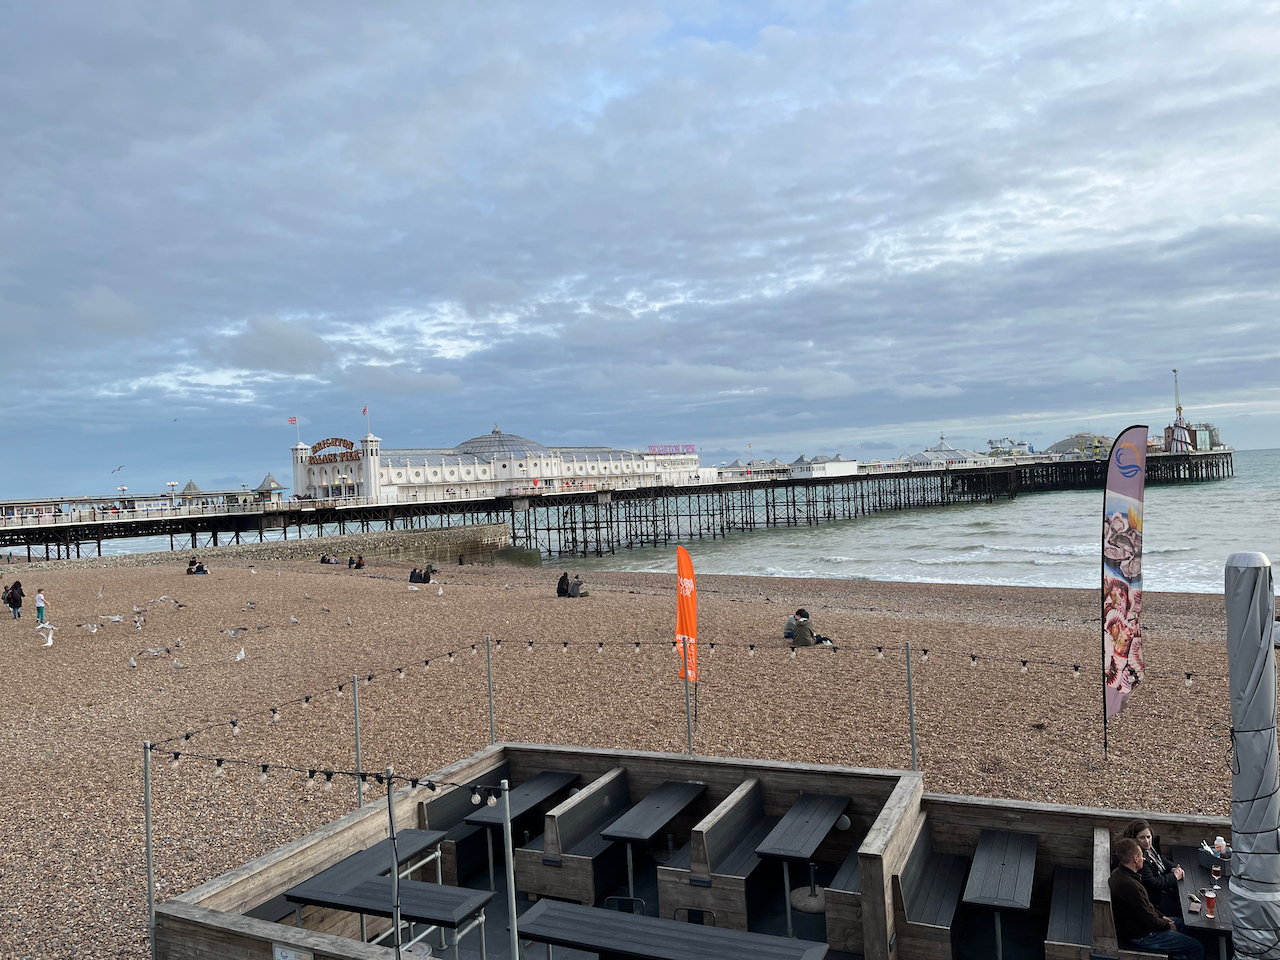 Brighton Palace Pier, with a long white building at the end near the shore, and lots of fairground attractions at the far end.